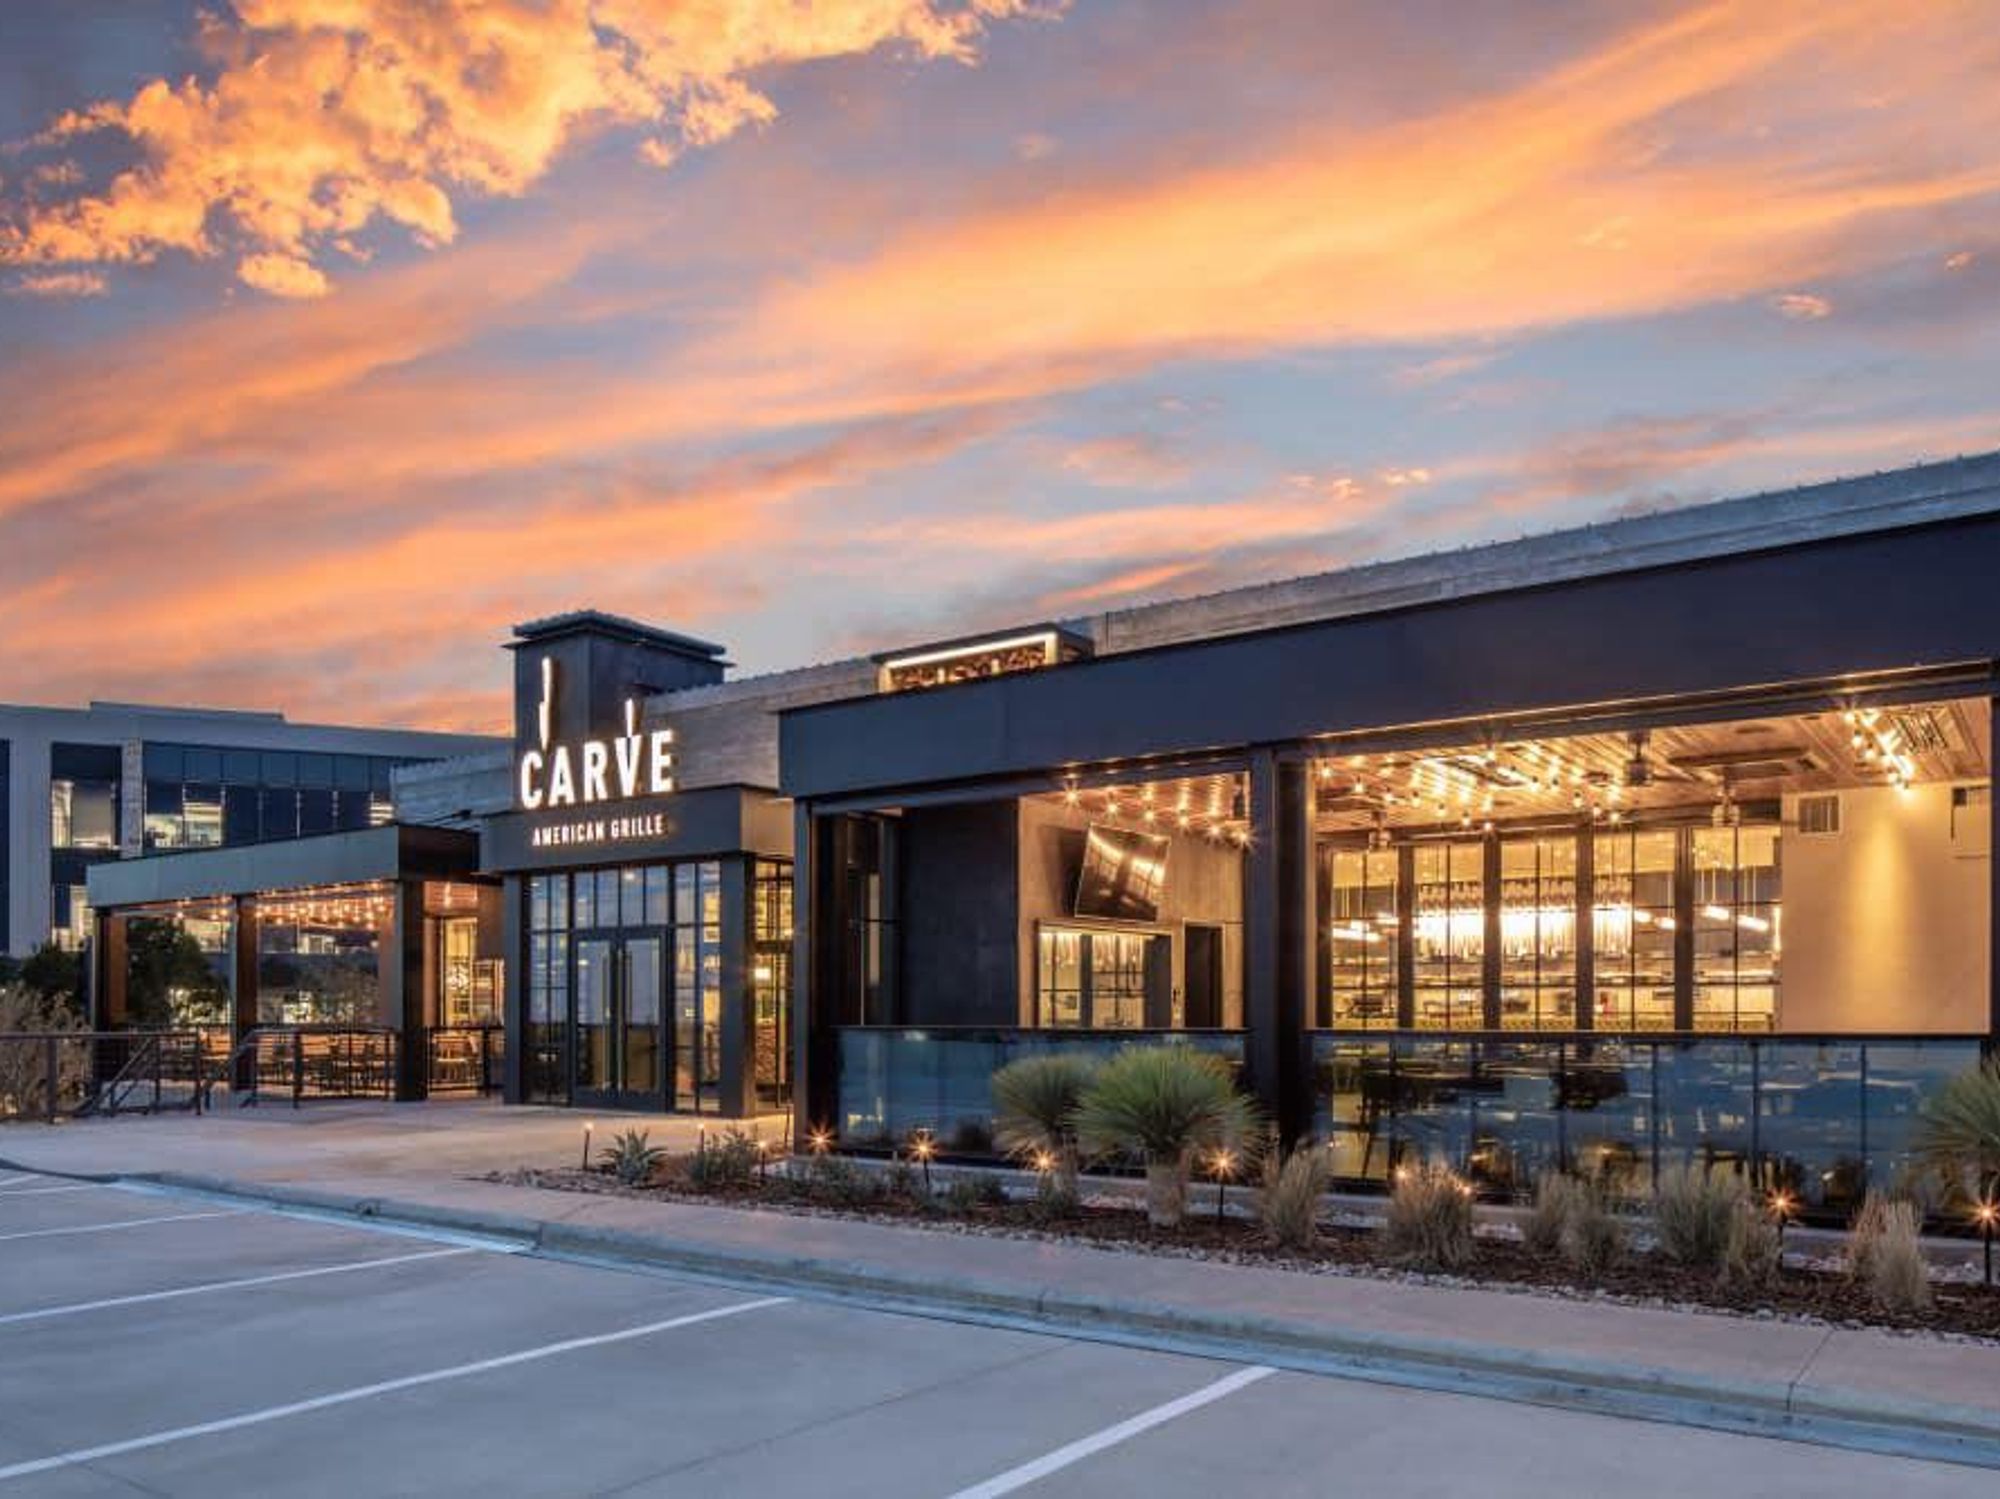 CARVE American Grille will open its second location in Austin later this year at The Grove.